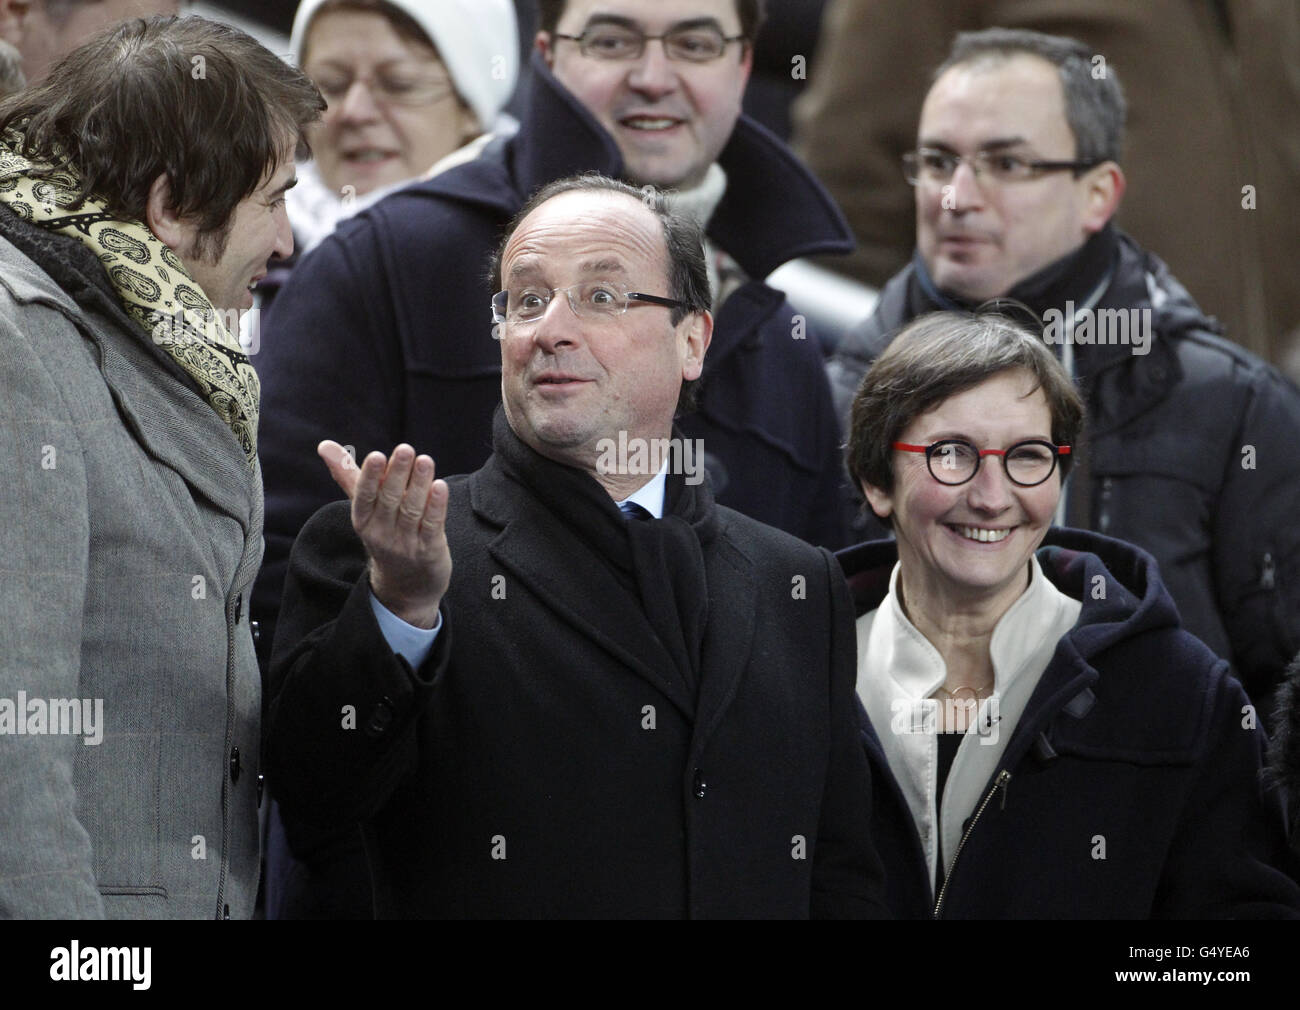 French Socialist Presidential election candidate Francois Hollande at the Six Nations rugby union match between France and Ireland at the Stade de France in Saint-Denis, near Paris. Stock Photo